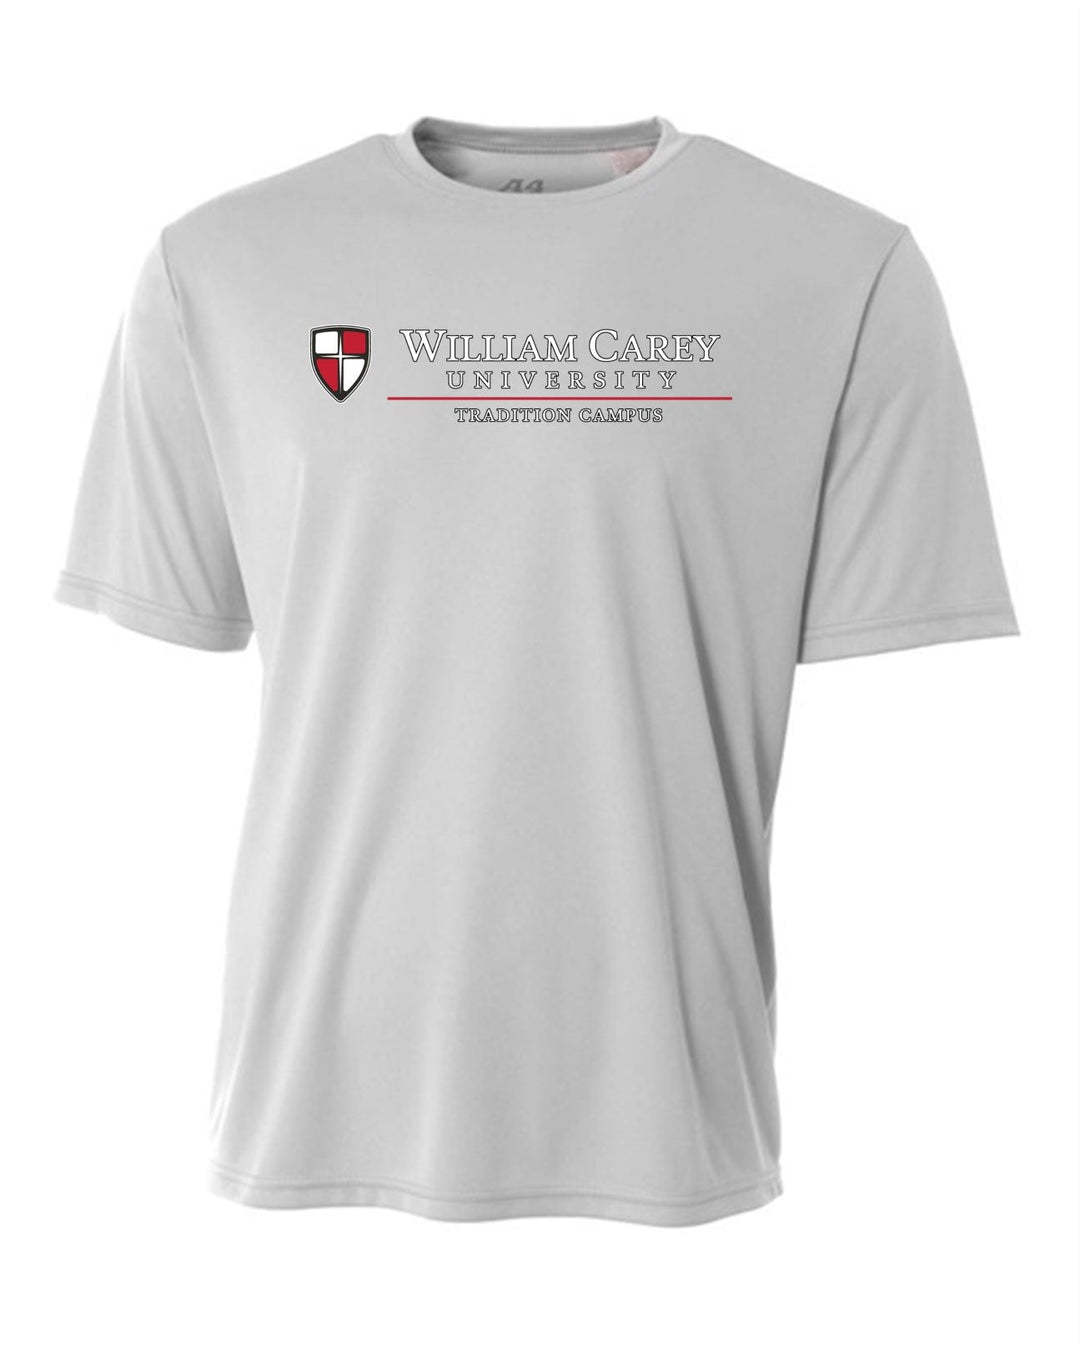 WCU Tradition Campus Youth Short-Sleeve Performance Shirt WCU TC Silver Grey Youth Small - Third Coast Soccer